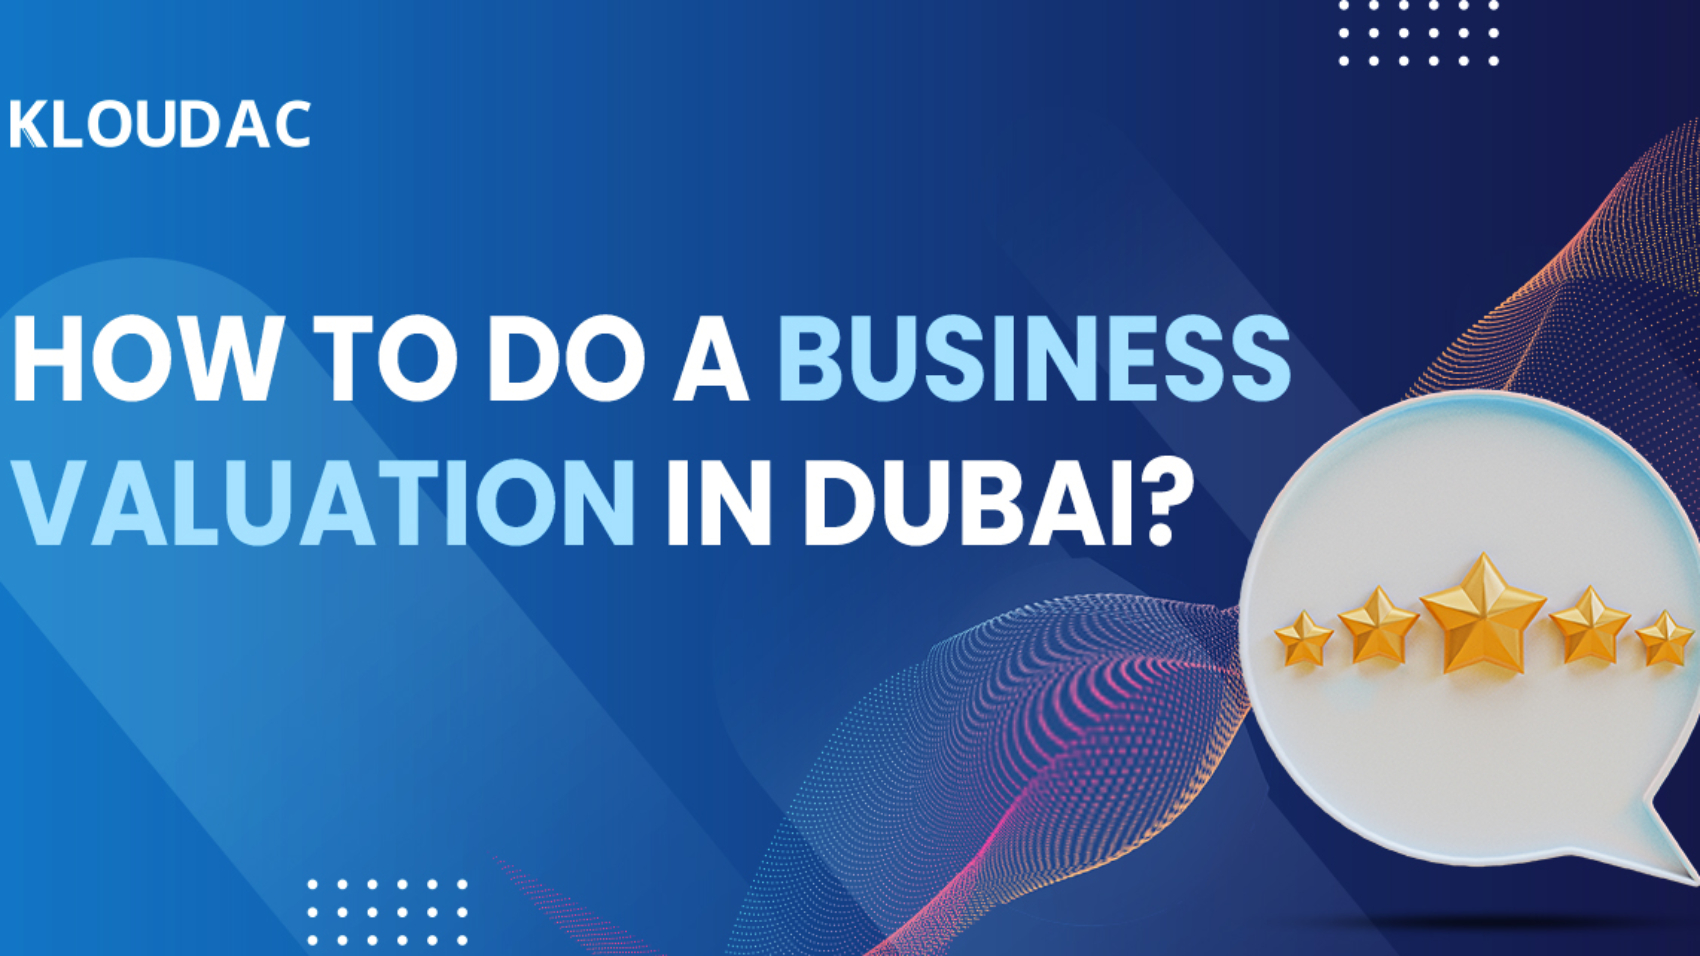 How to do a business valuation in Dubai?